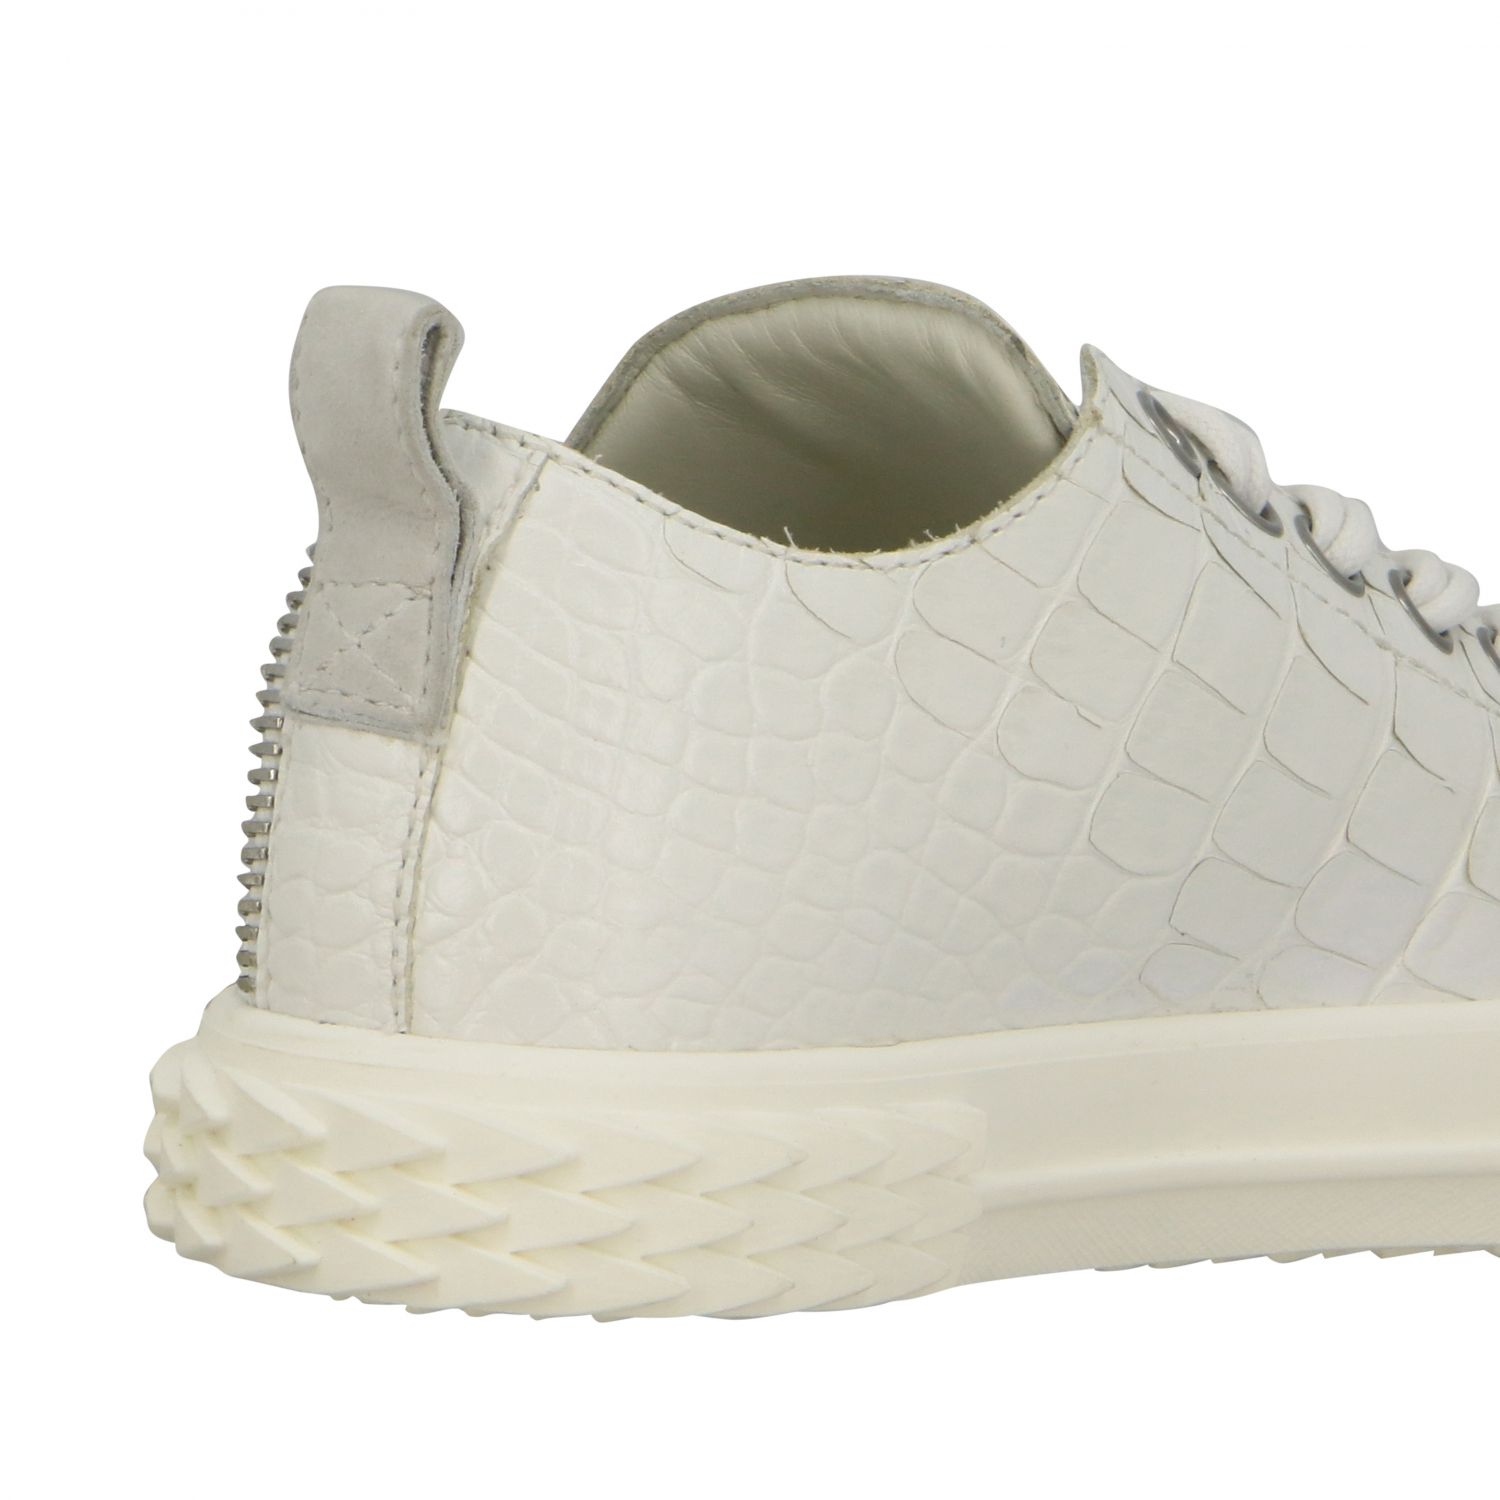 Citere let at håndtere geni Giuseppe Zanotti Design Outlet: sneakers in croc print leather | Sneakers  Giuseppe Zanotti Design Women White | Sneakers Giuseppe Zanotti Design  RW90029 GIGLIO.COM